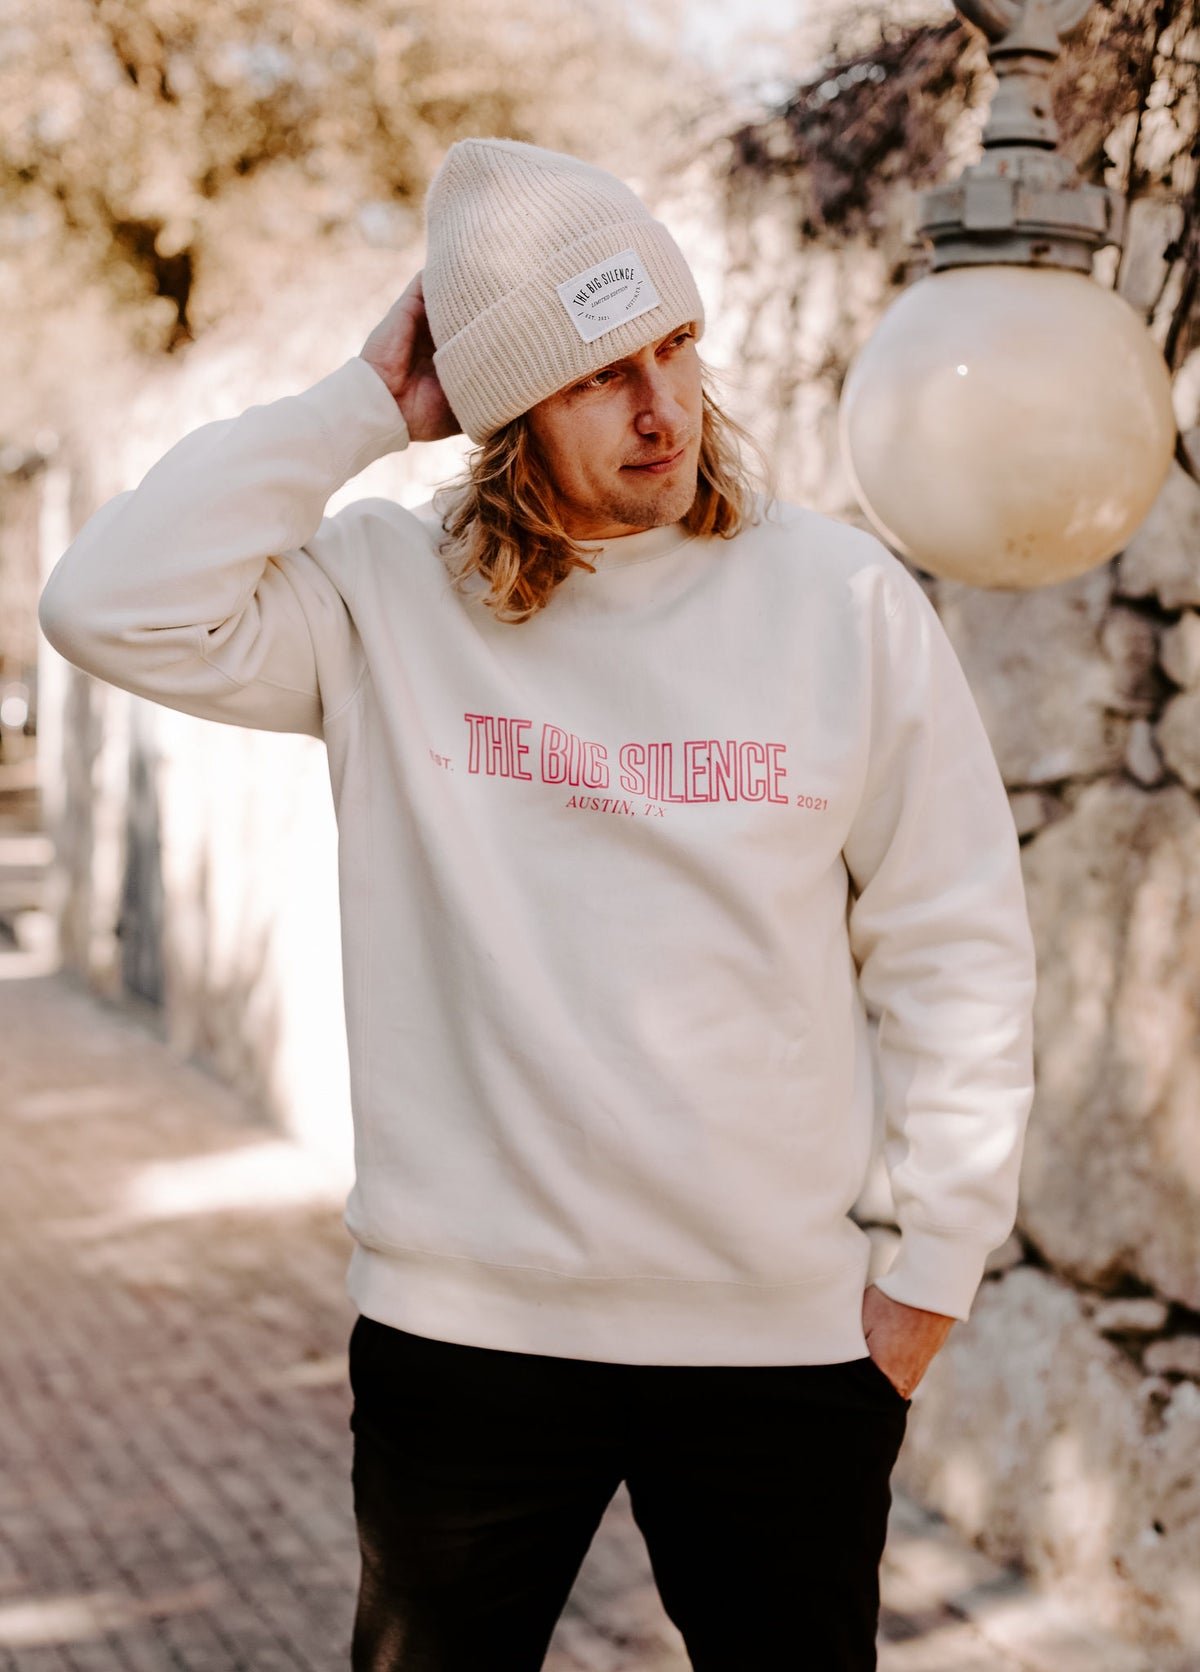 Bobby next to a stone wall in the bone TBS sweatshirt and beanie